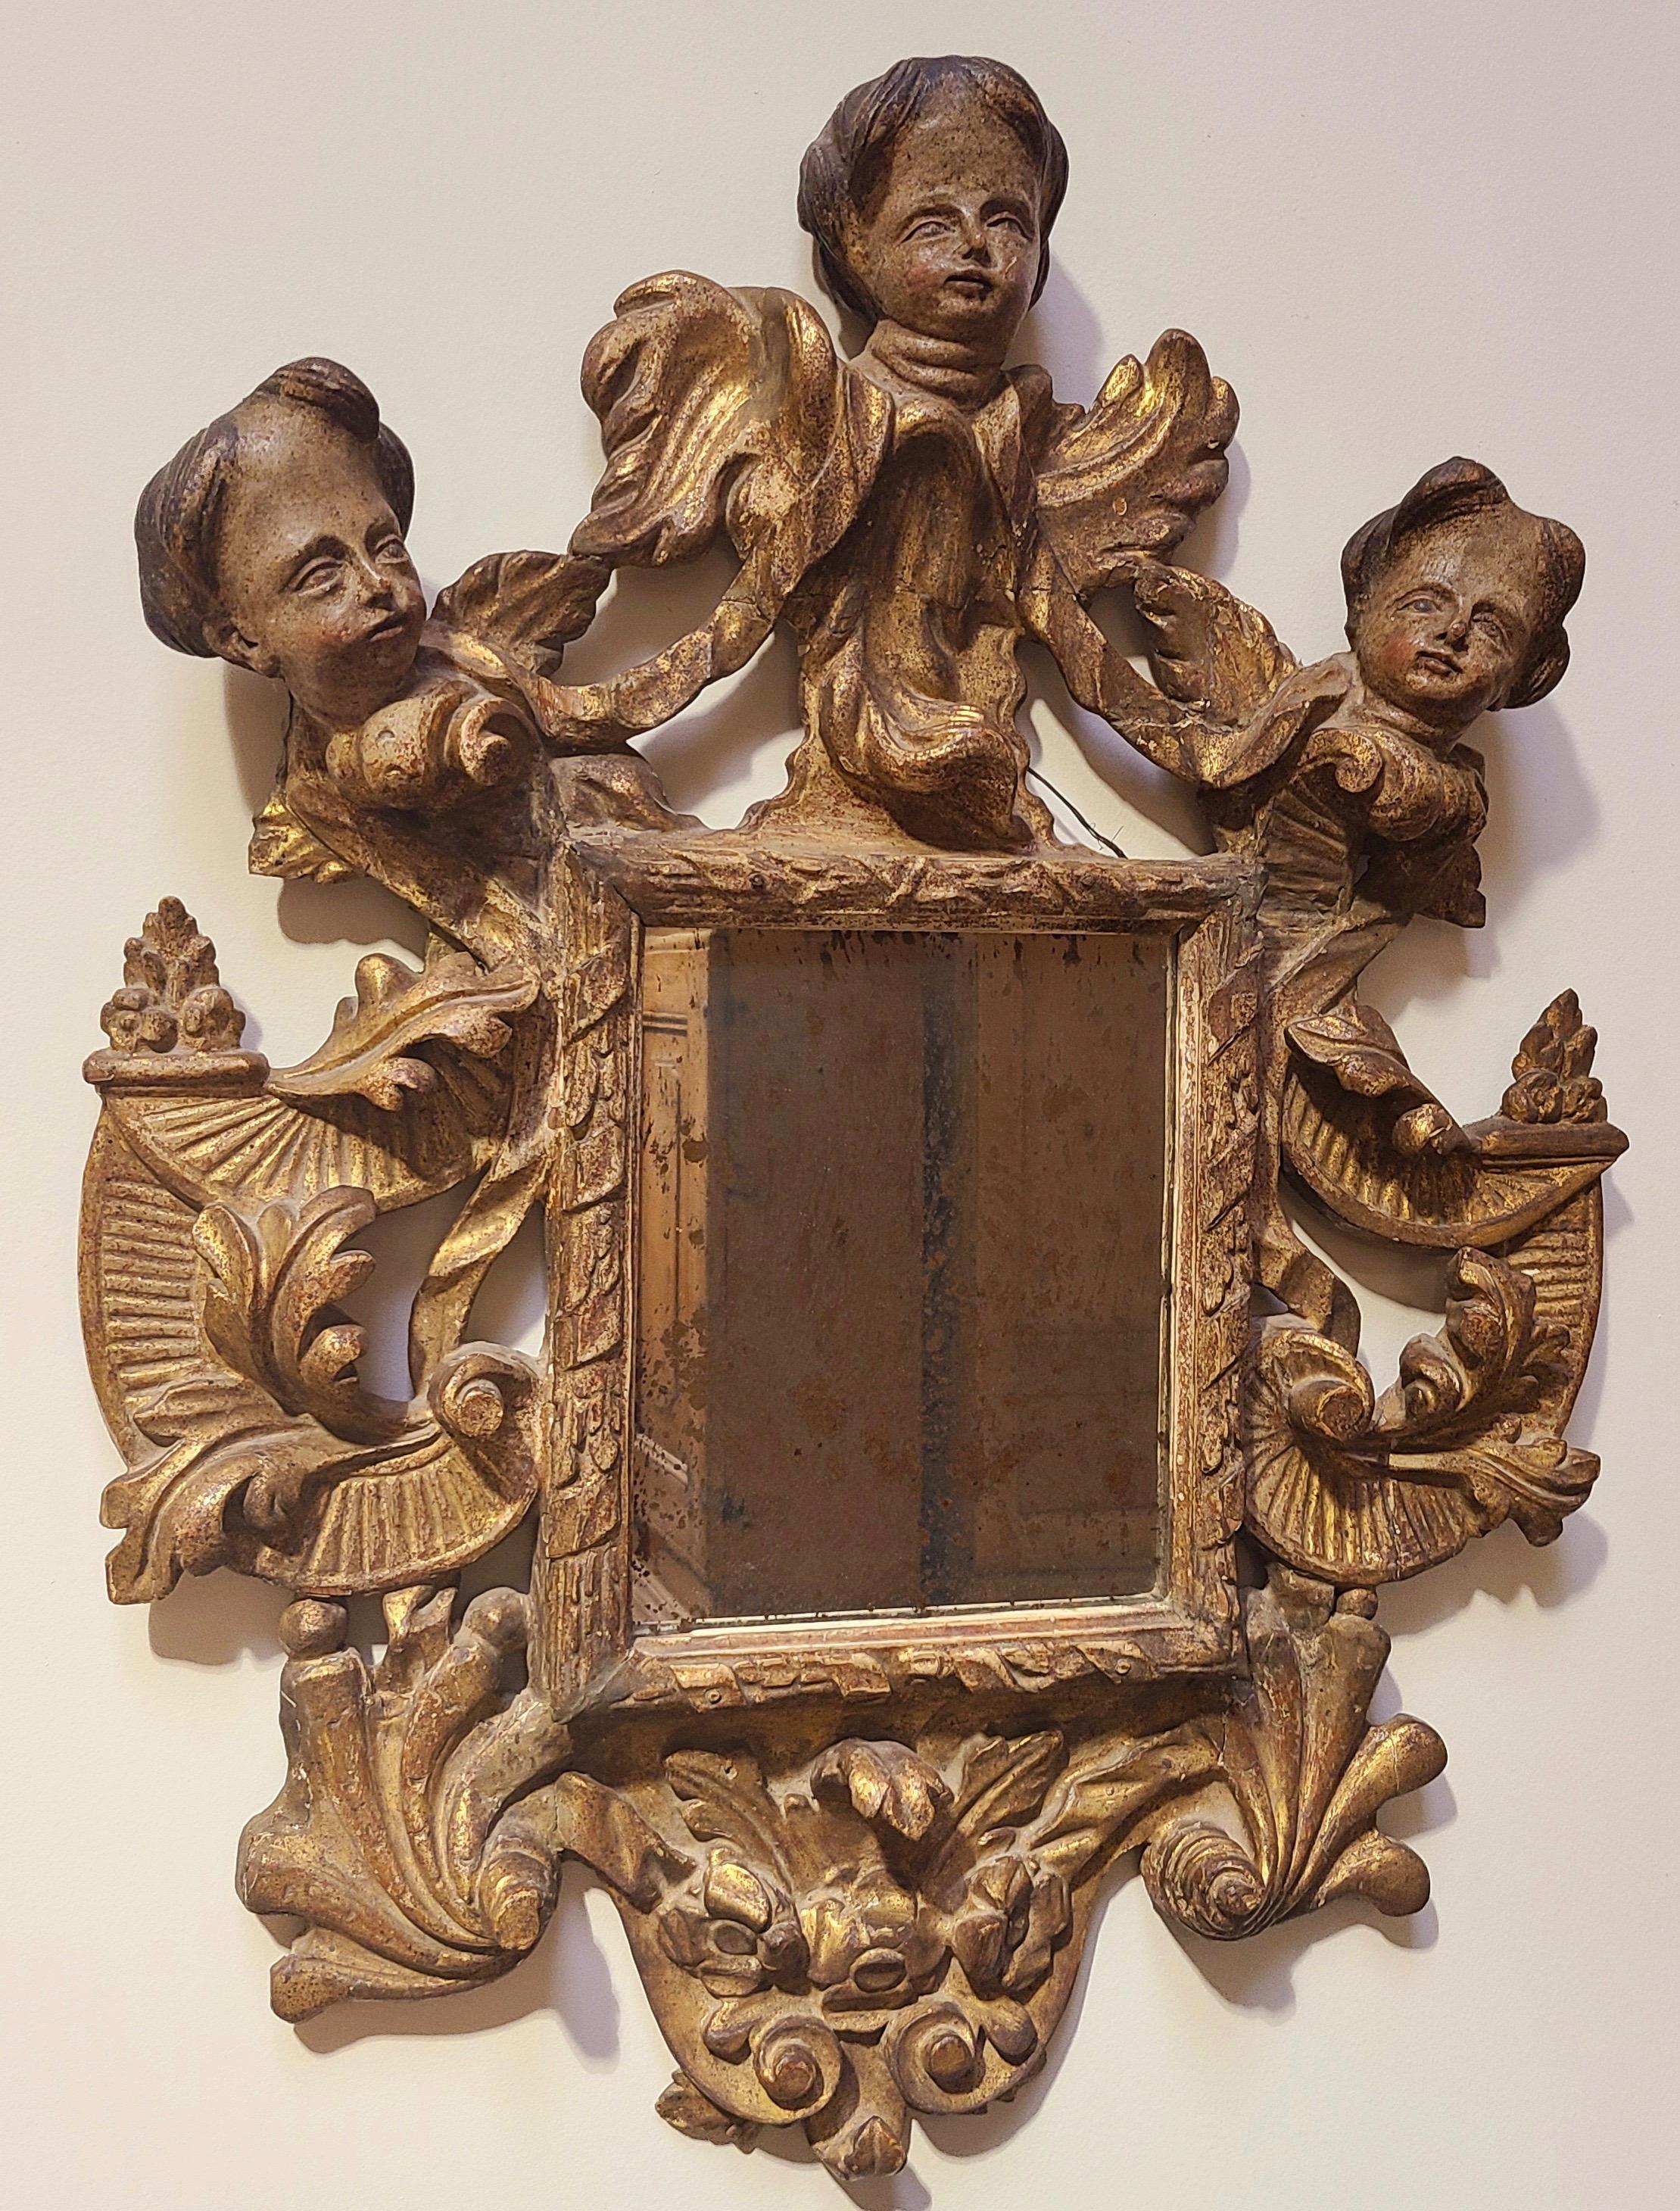 Beautifully carved and gold leafed wood mirror with three cherubs holding garland swags, and the frame having centuries old patina. In remarkable condition.
Original hand forged iron loop for hanging.
Italy, 18th century.

Old replacement